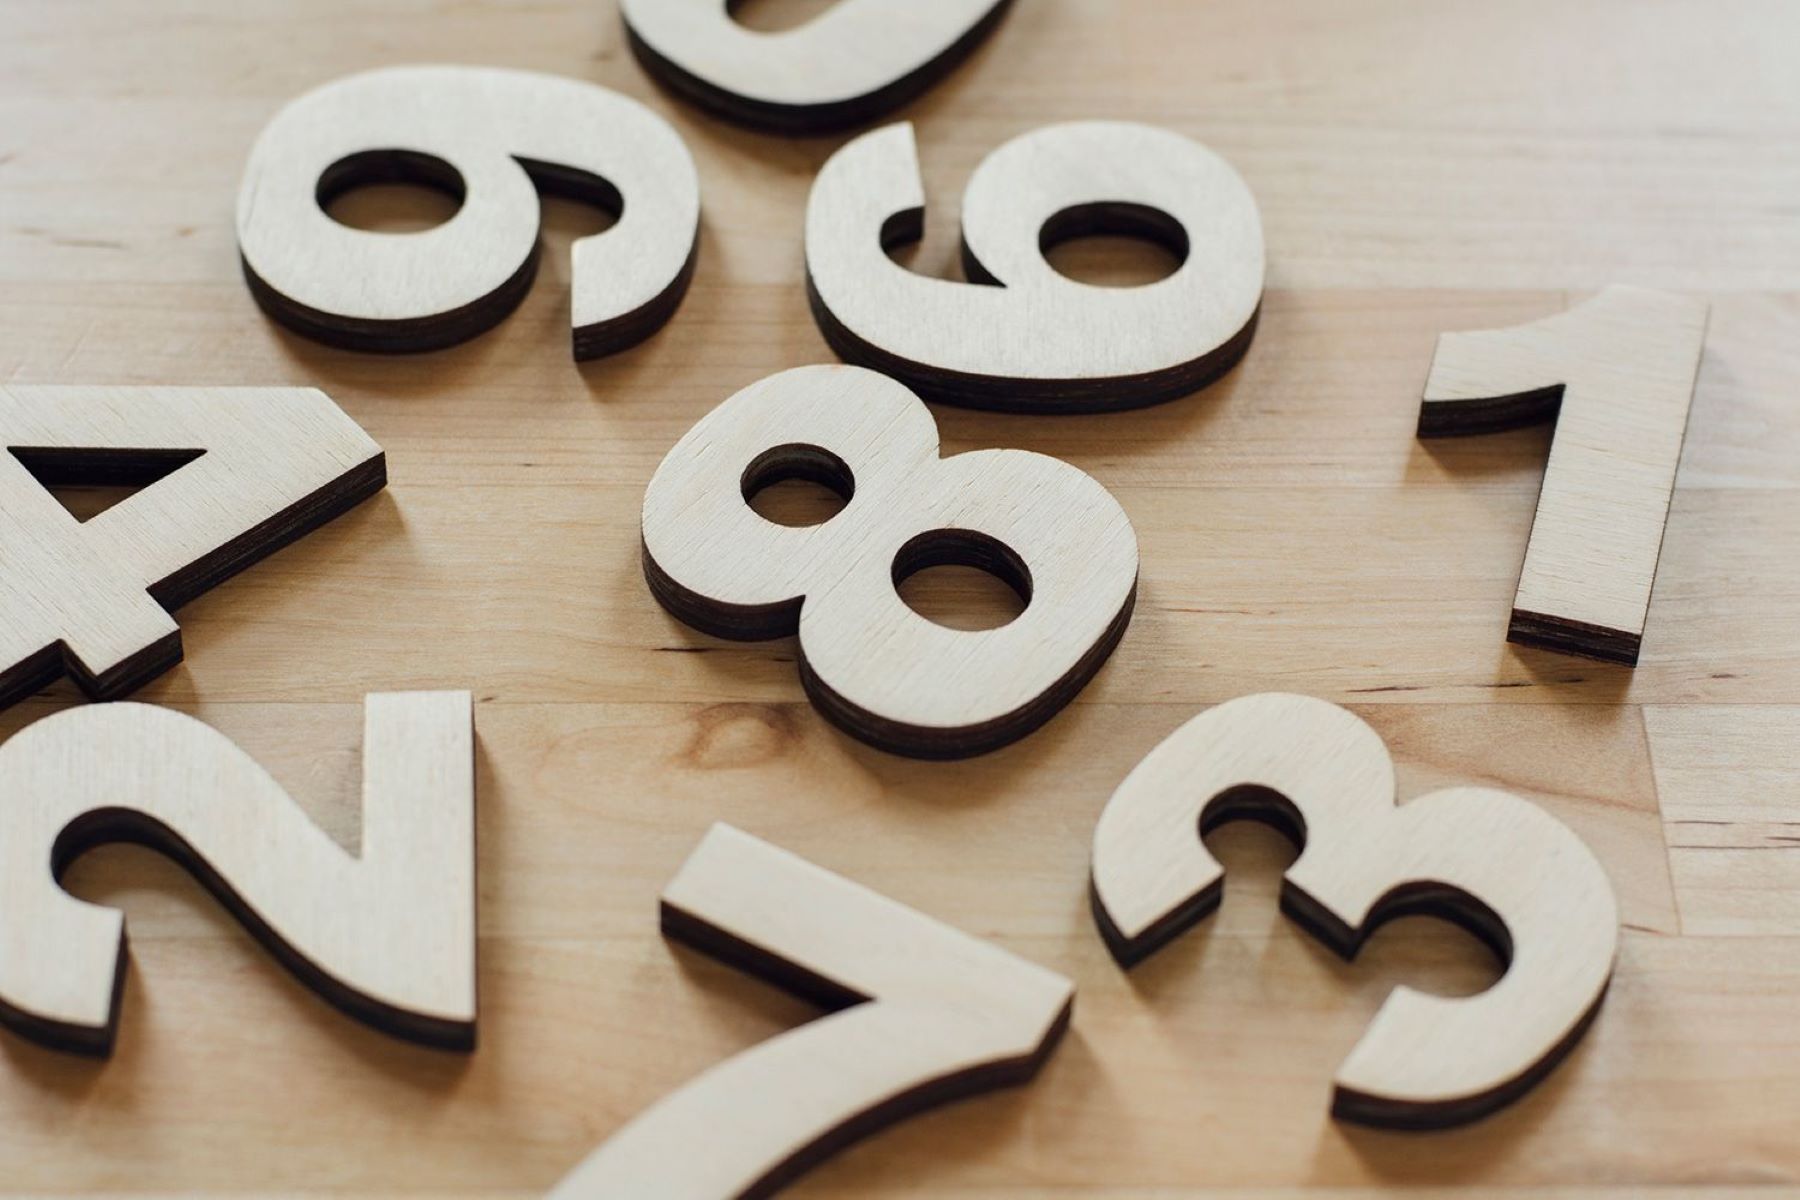 Mind-Blowing Number Sequence Revealed: What Comes After 13?